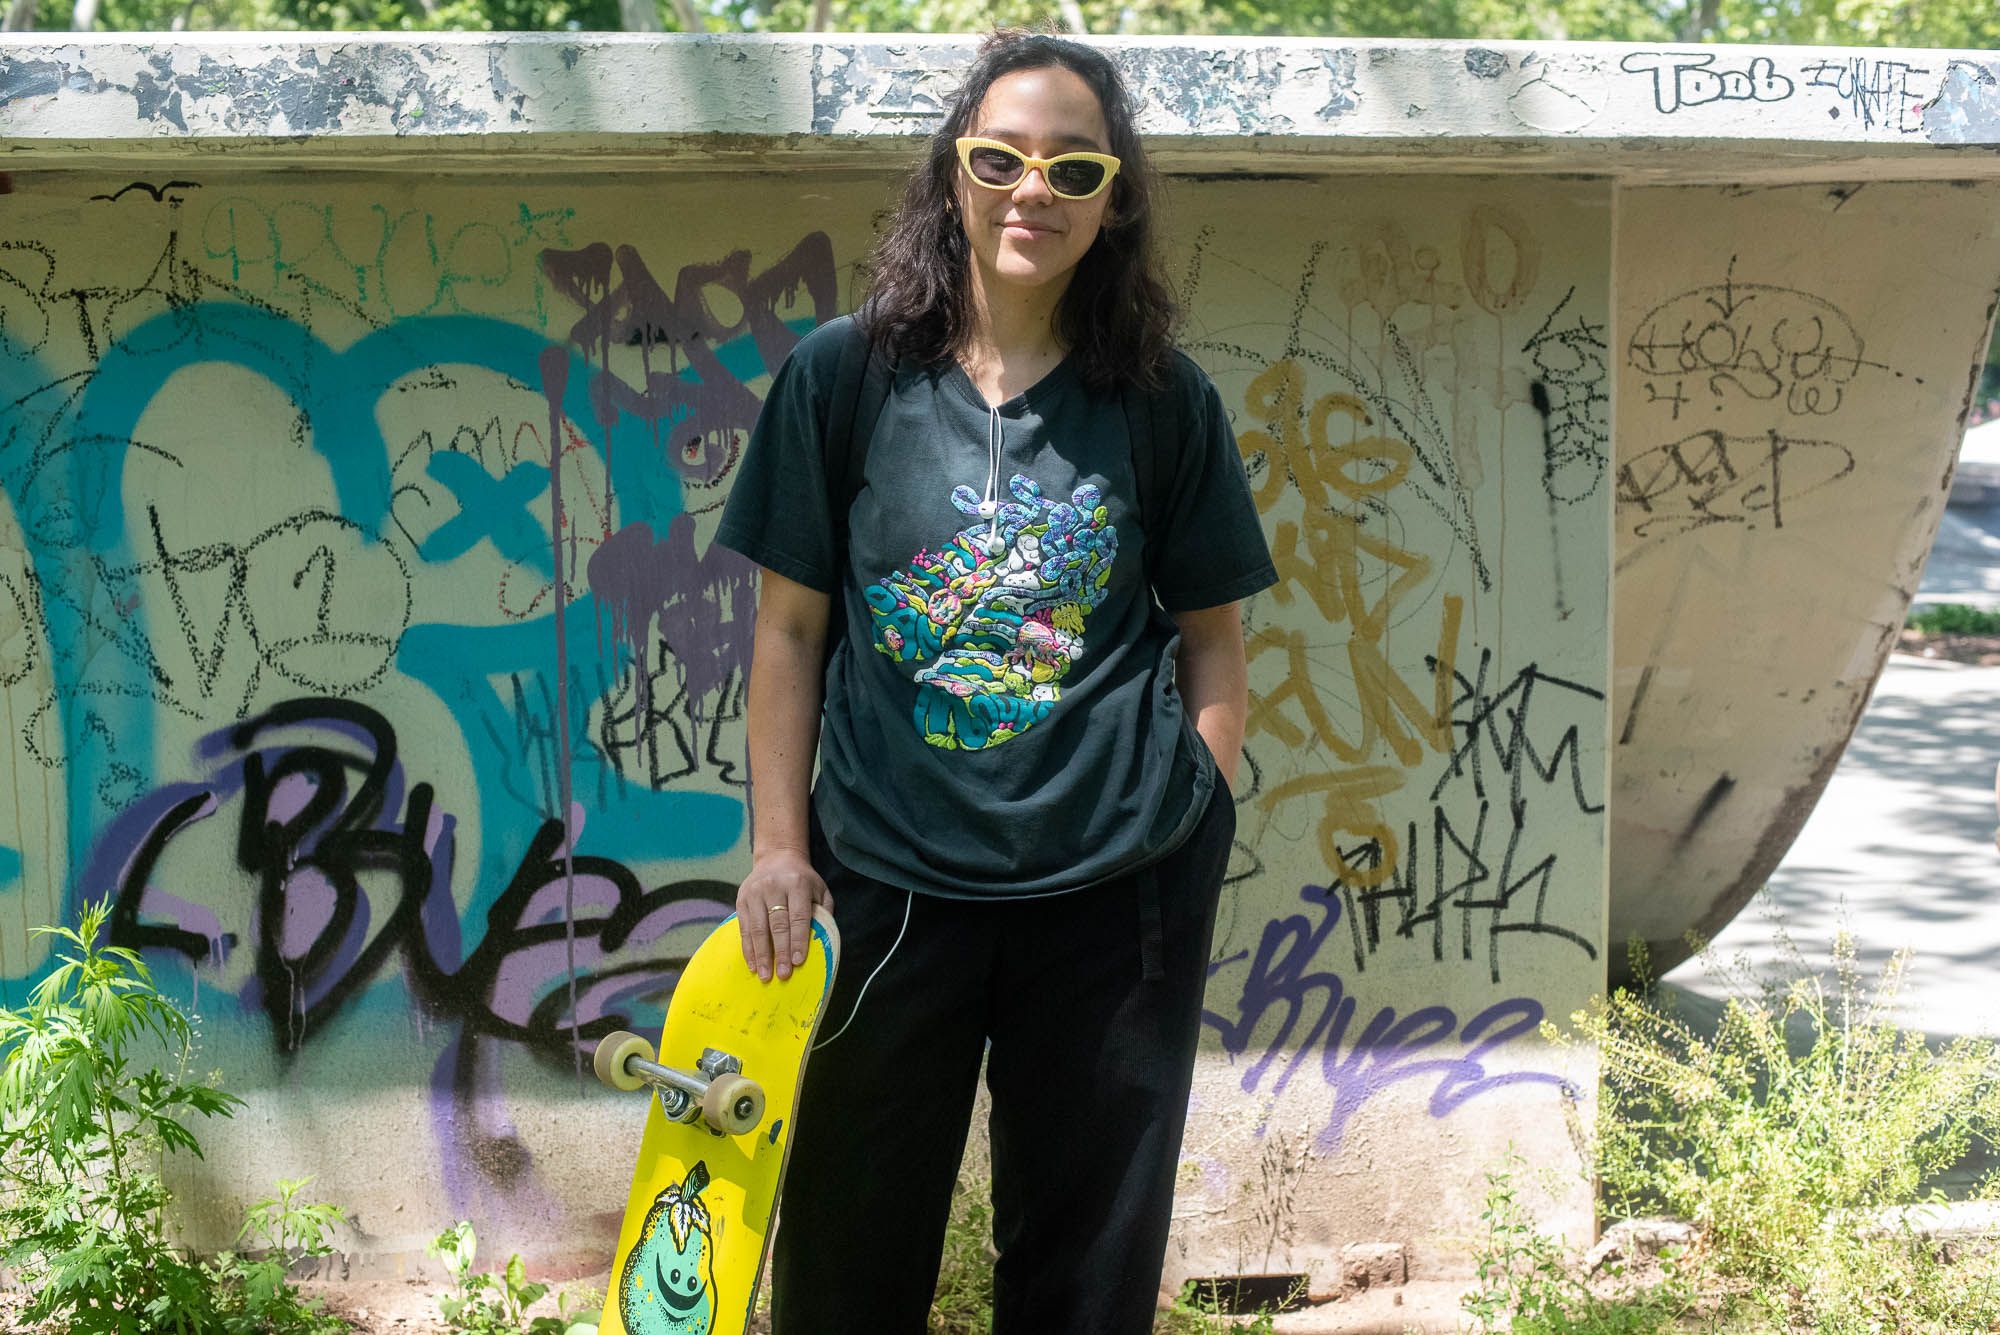 Paxman with her left hand in her pocket wearing black clothing and yellow sunglasses next to her skateboard, which is bright yellow with a blue-green fruit that's smiling.